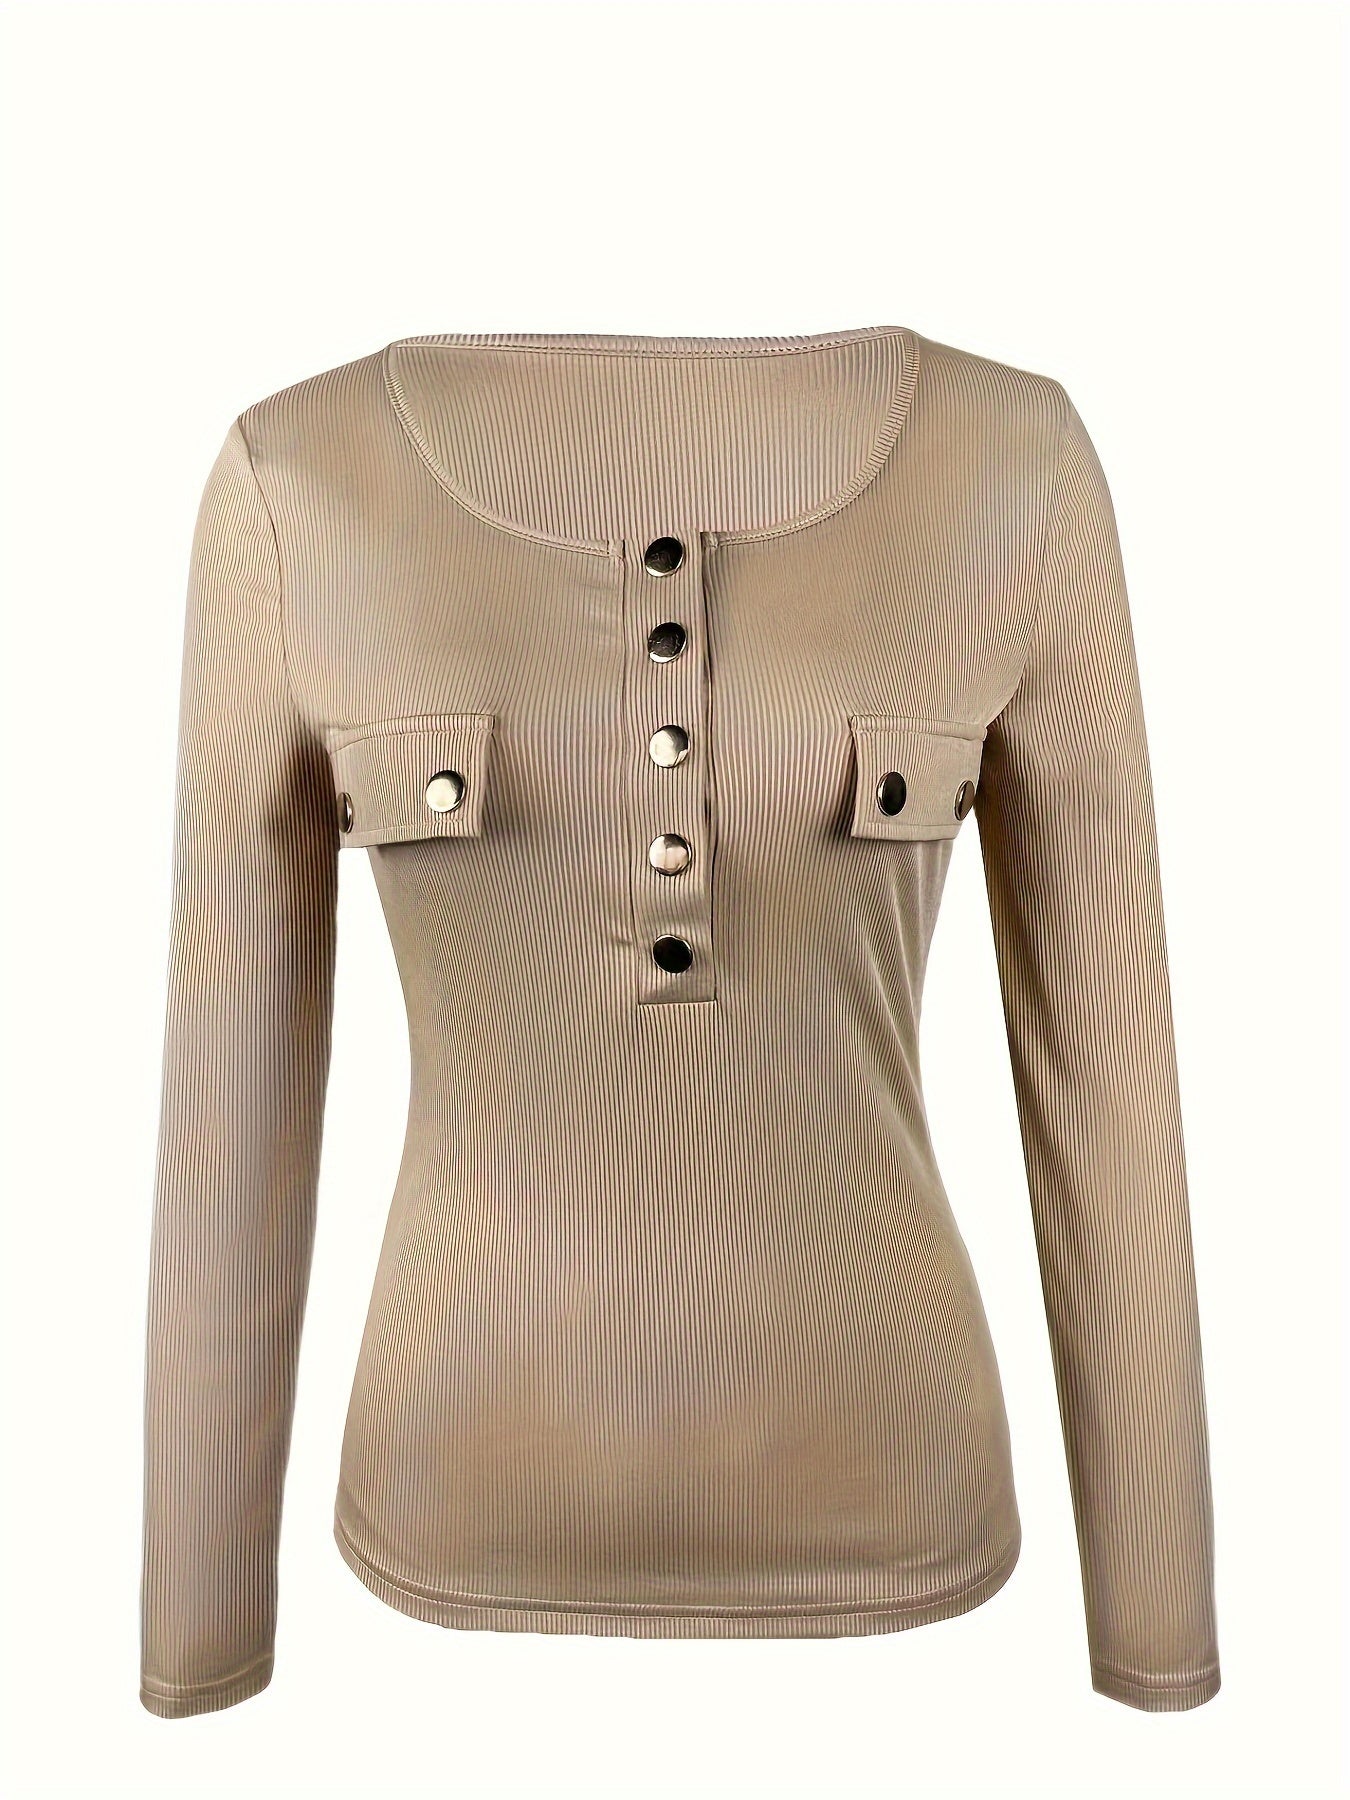 Antmvs Ribbed Buckle Front T-Shirt, Casual Long Sleeve Top For Spring & Fall, Women's Clothing